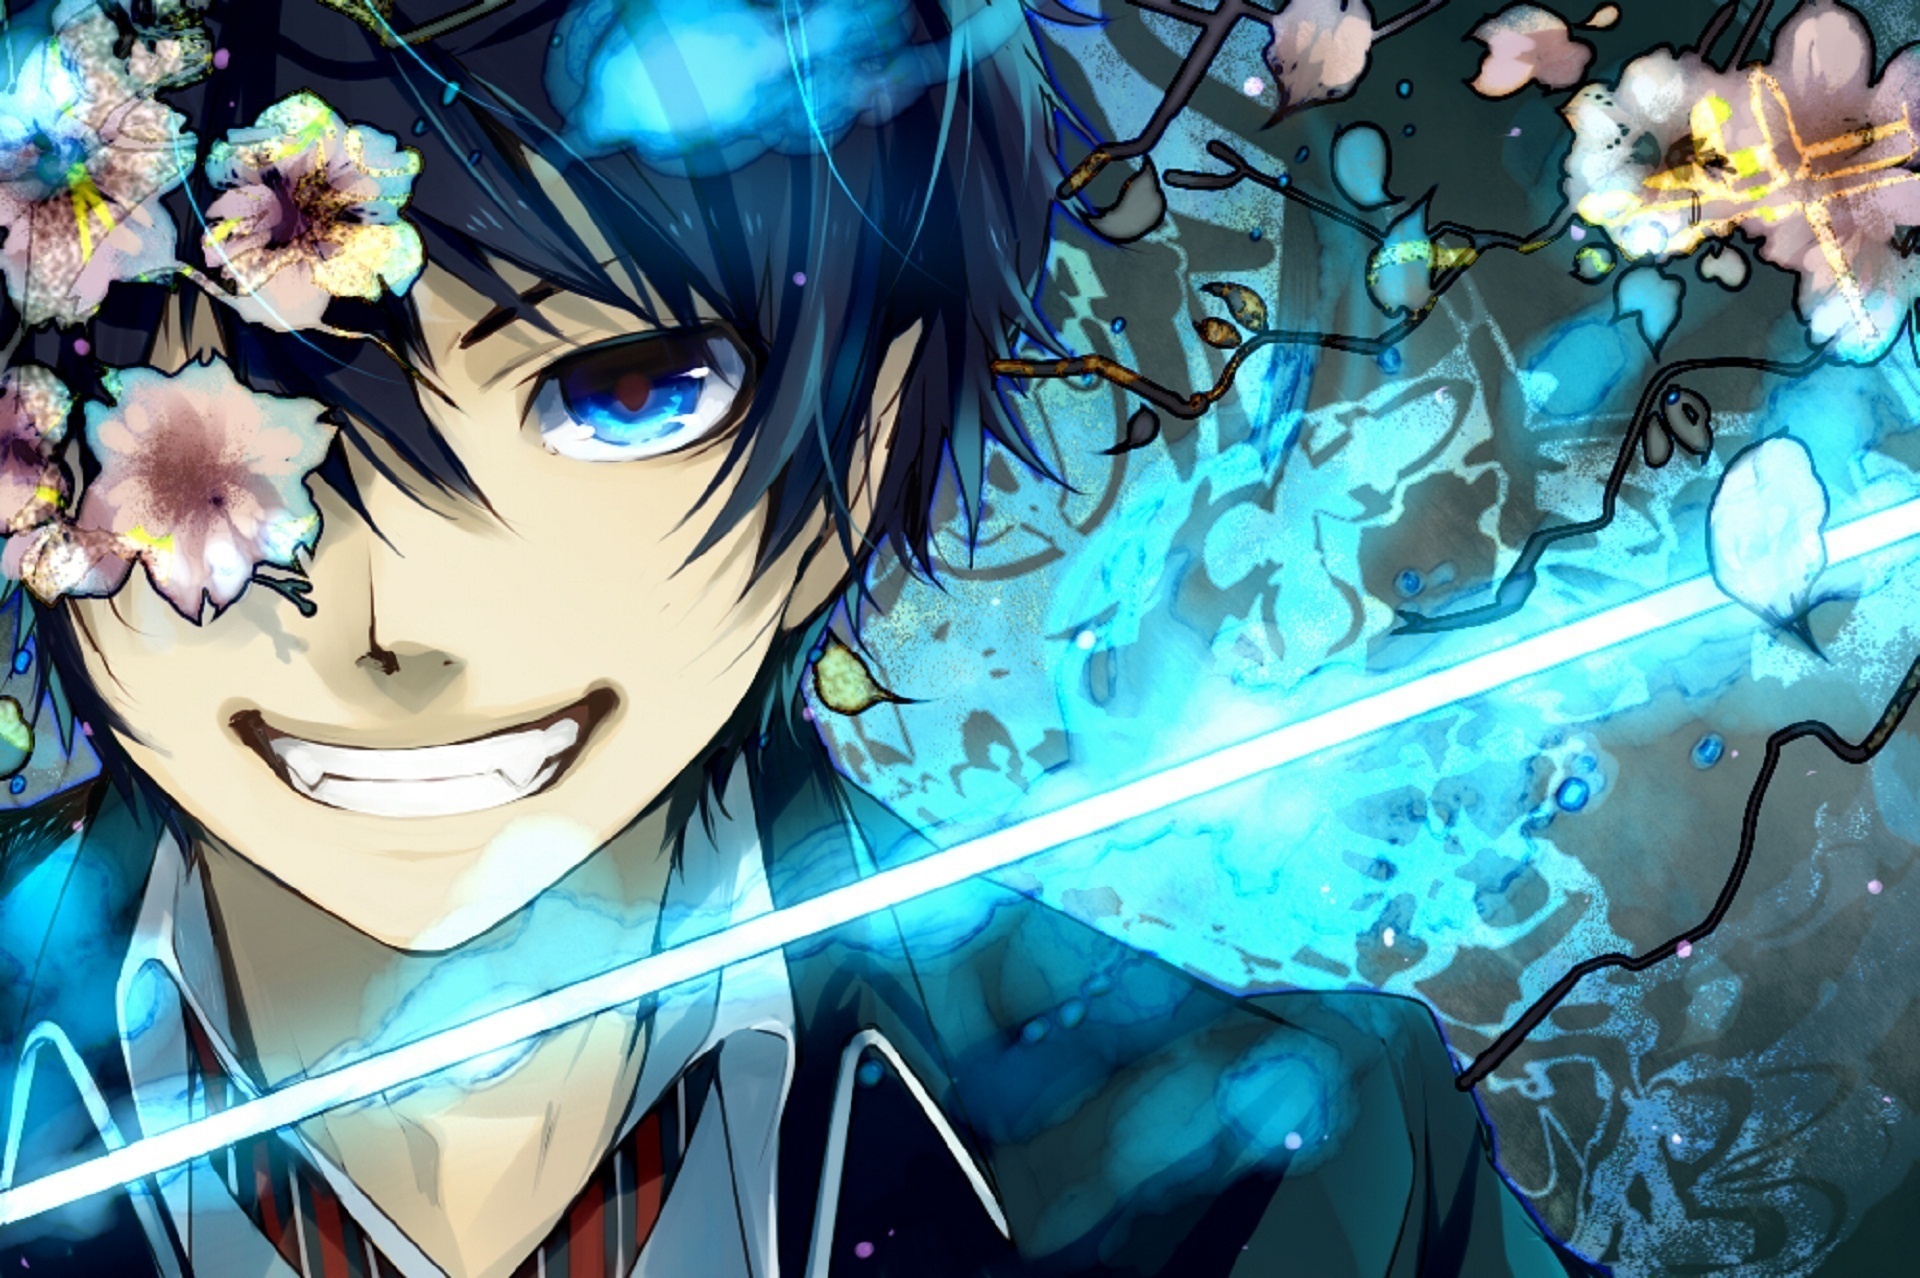 10. "Rin Okumura from Blue Exorcist" - wide 7